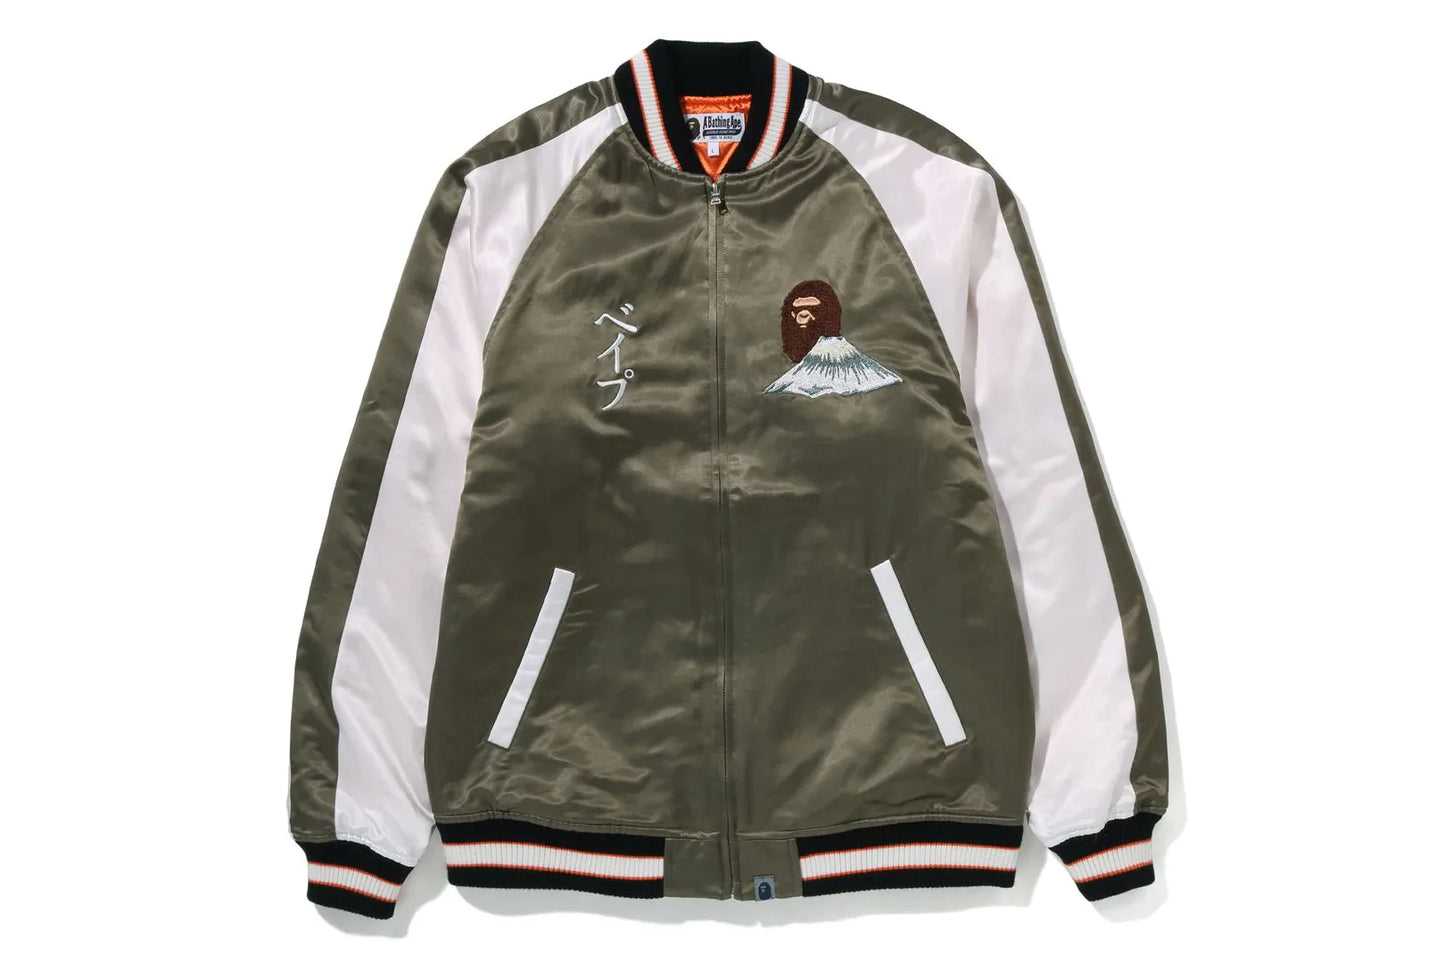 Bape Embroidered Limited Edition Souvenir Jacket